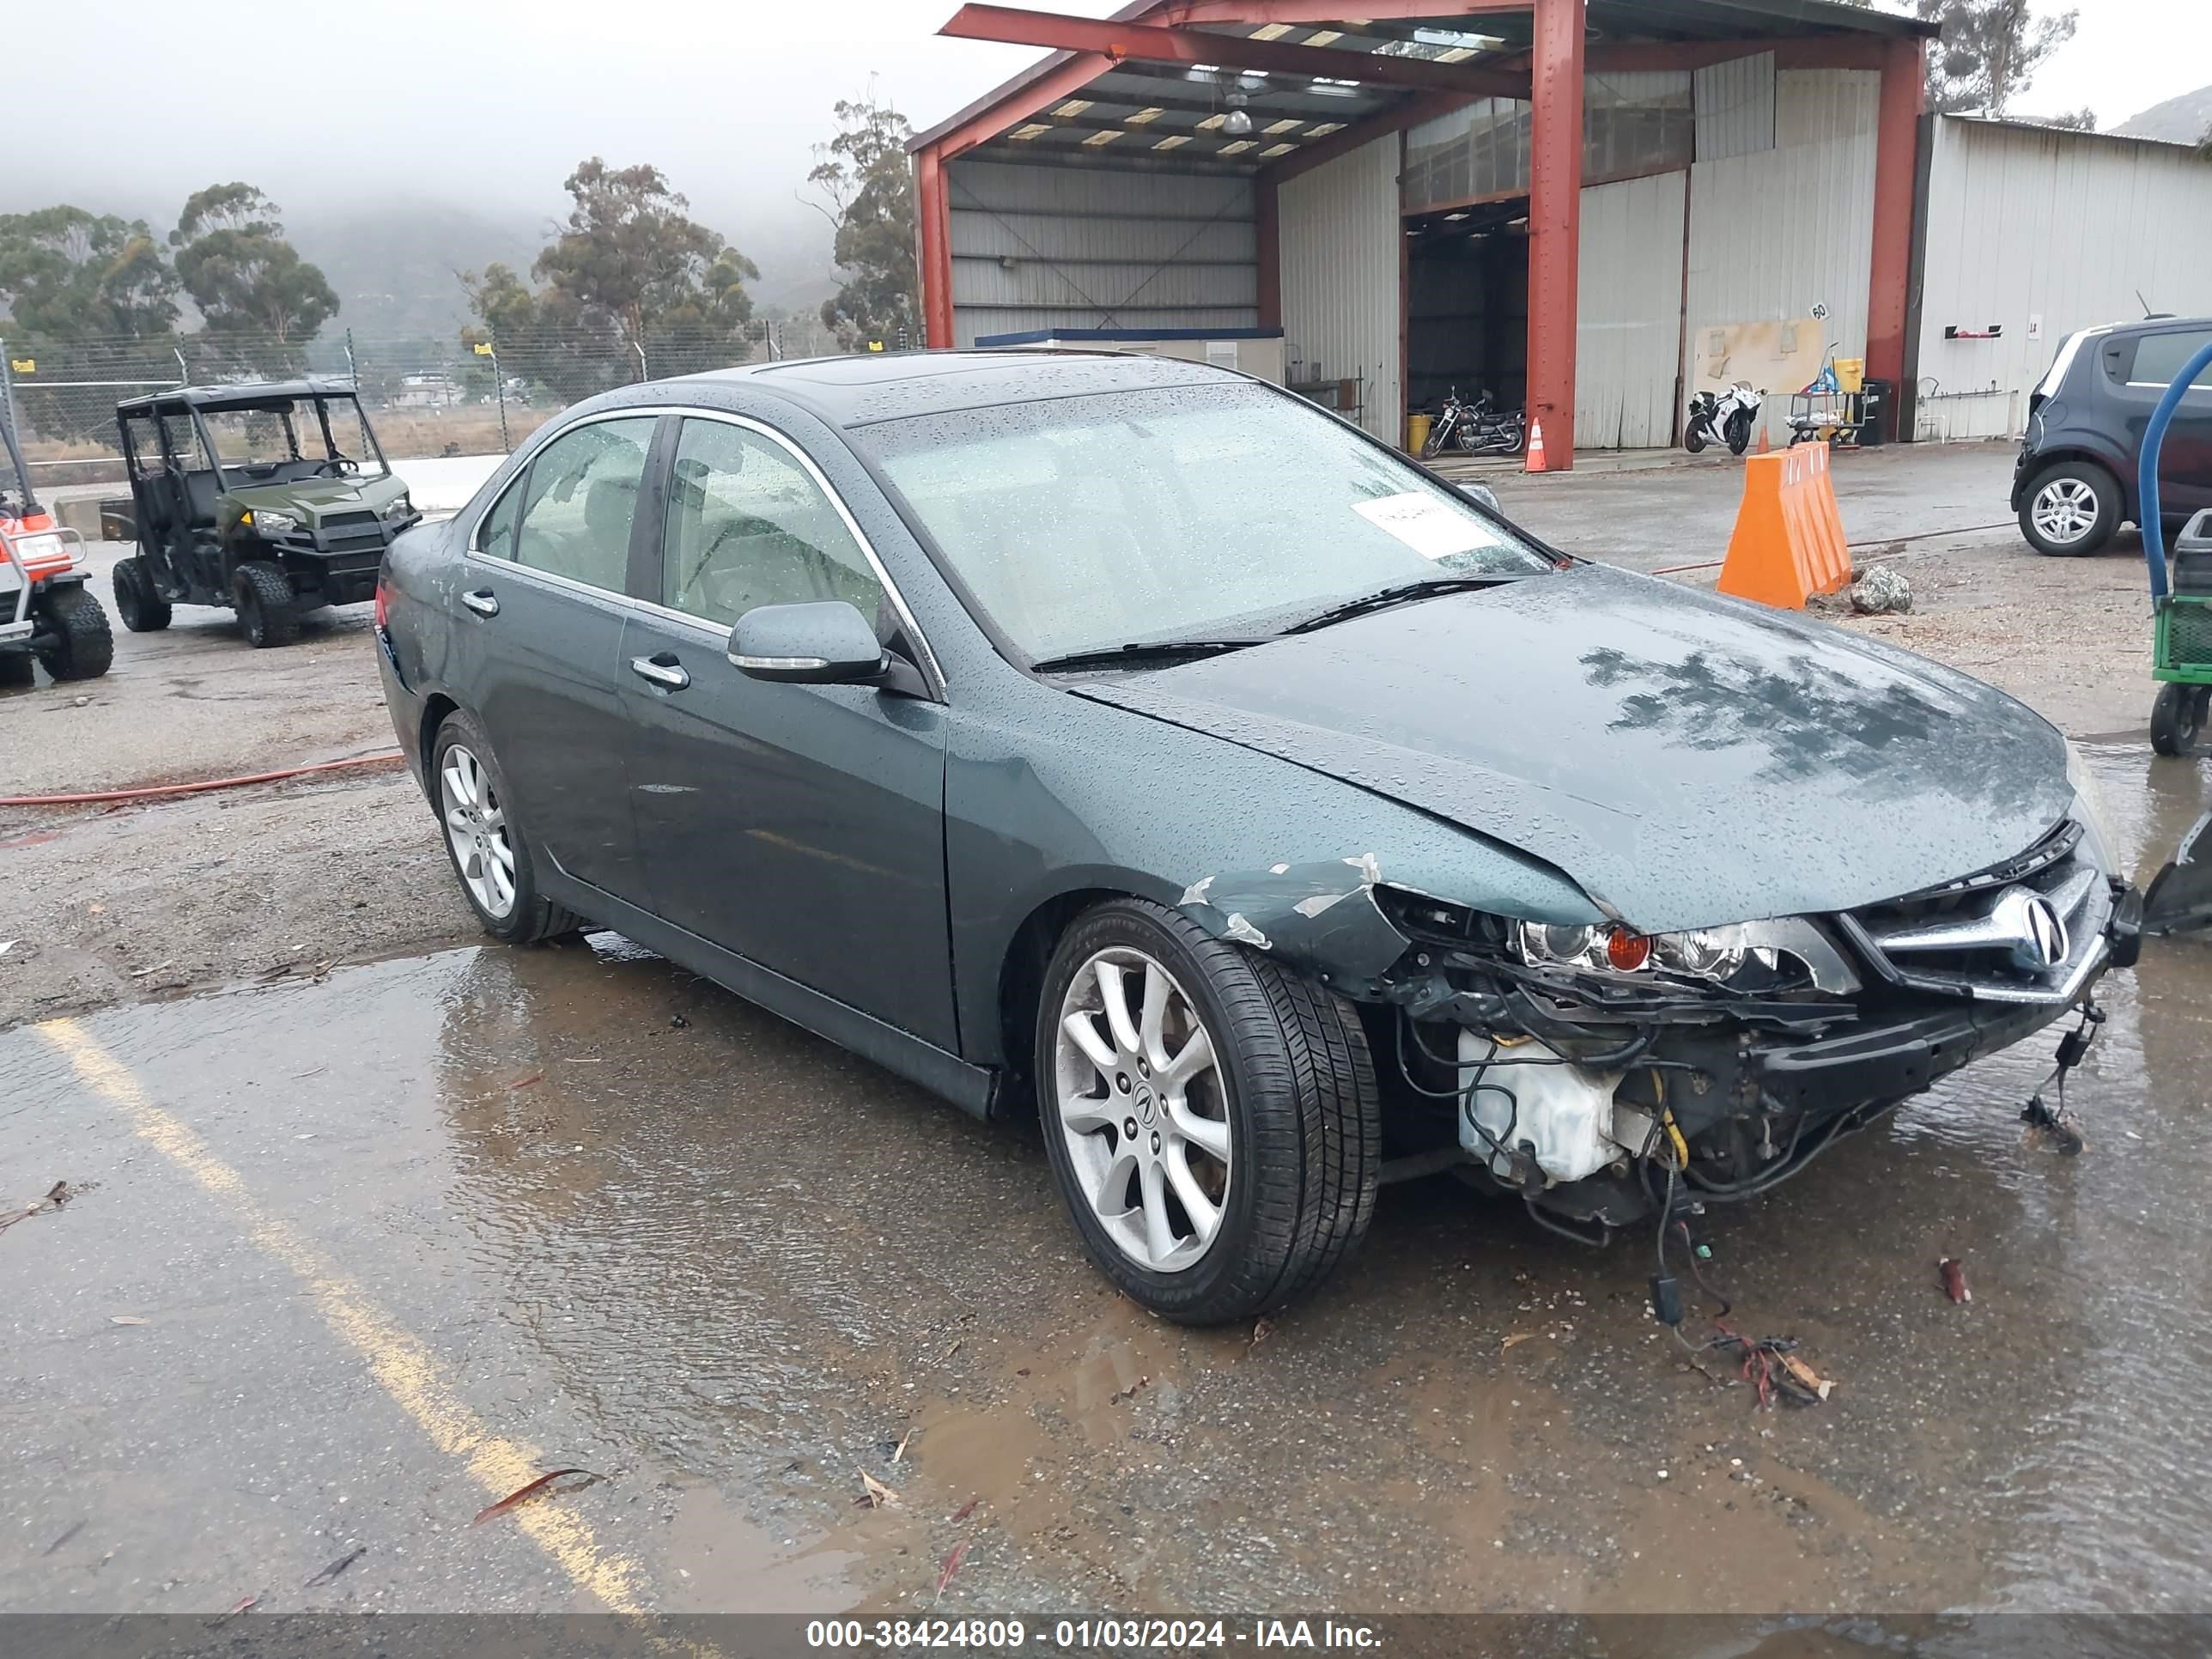 vin: JH4CL96926C036308 JH4CL96926C036308 2006 acura tsx 2400 for Sale in 92509, 3600 Pyrite St, Jurupa Valley, California, USA